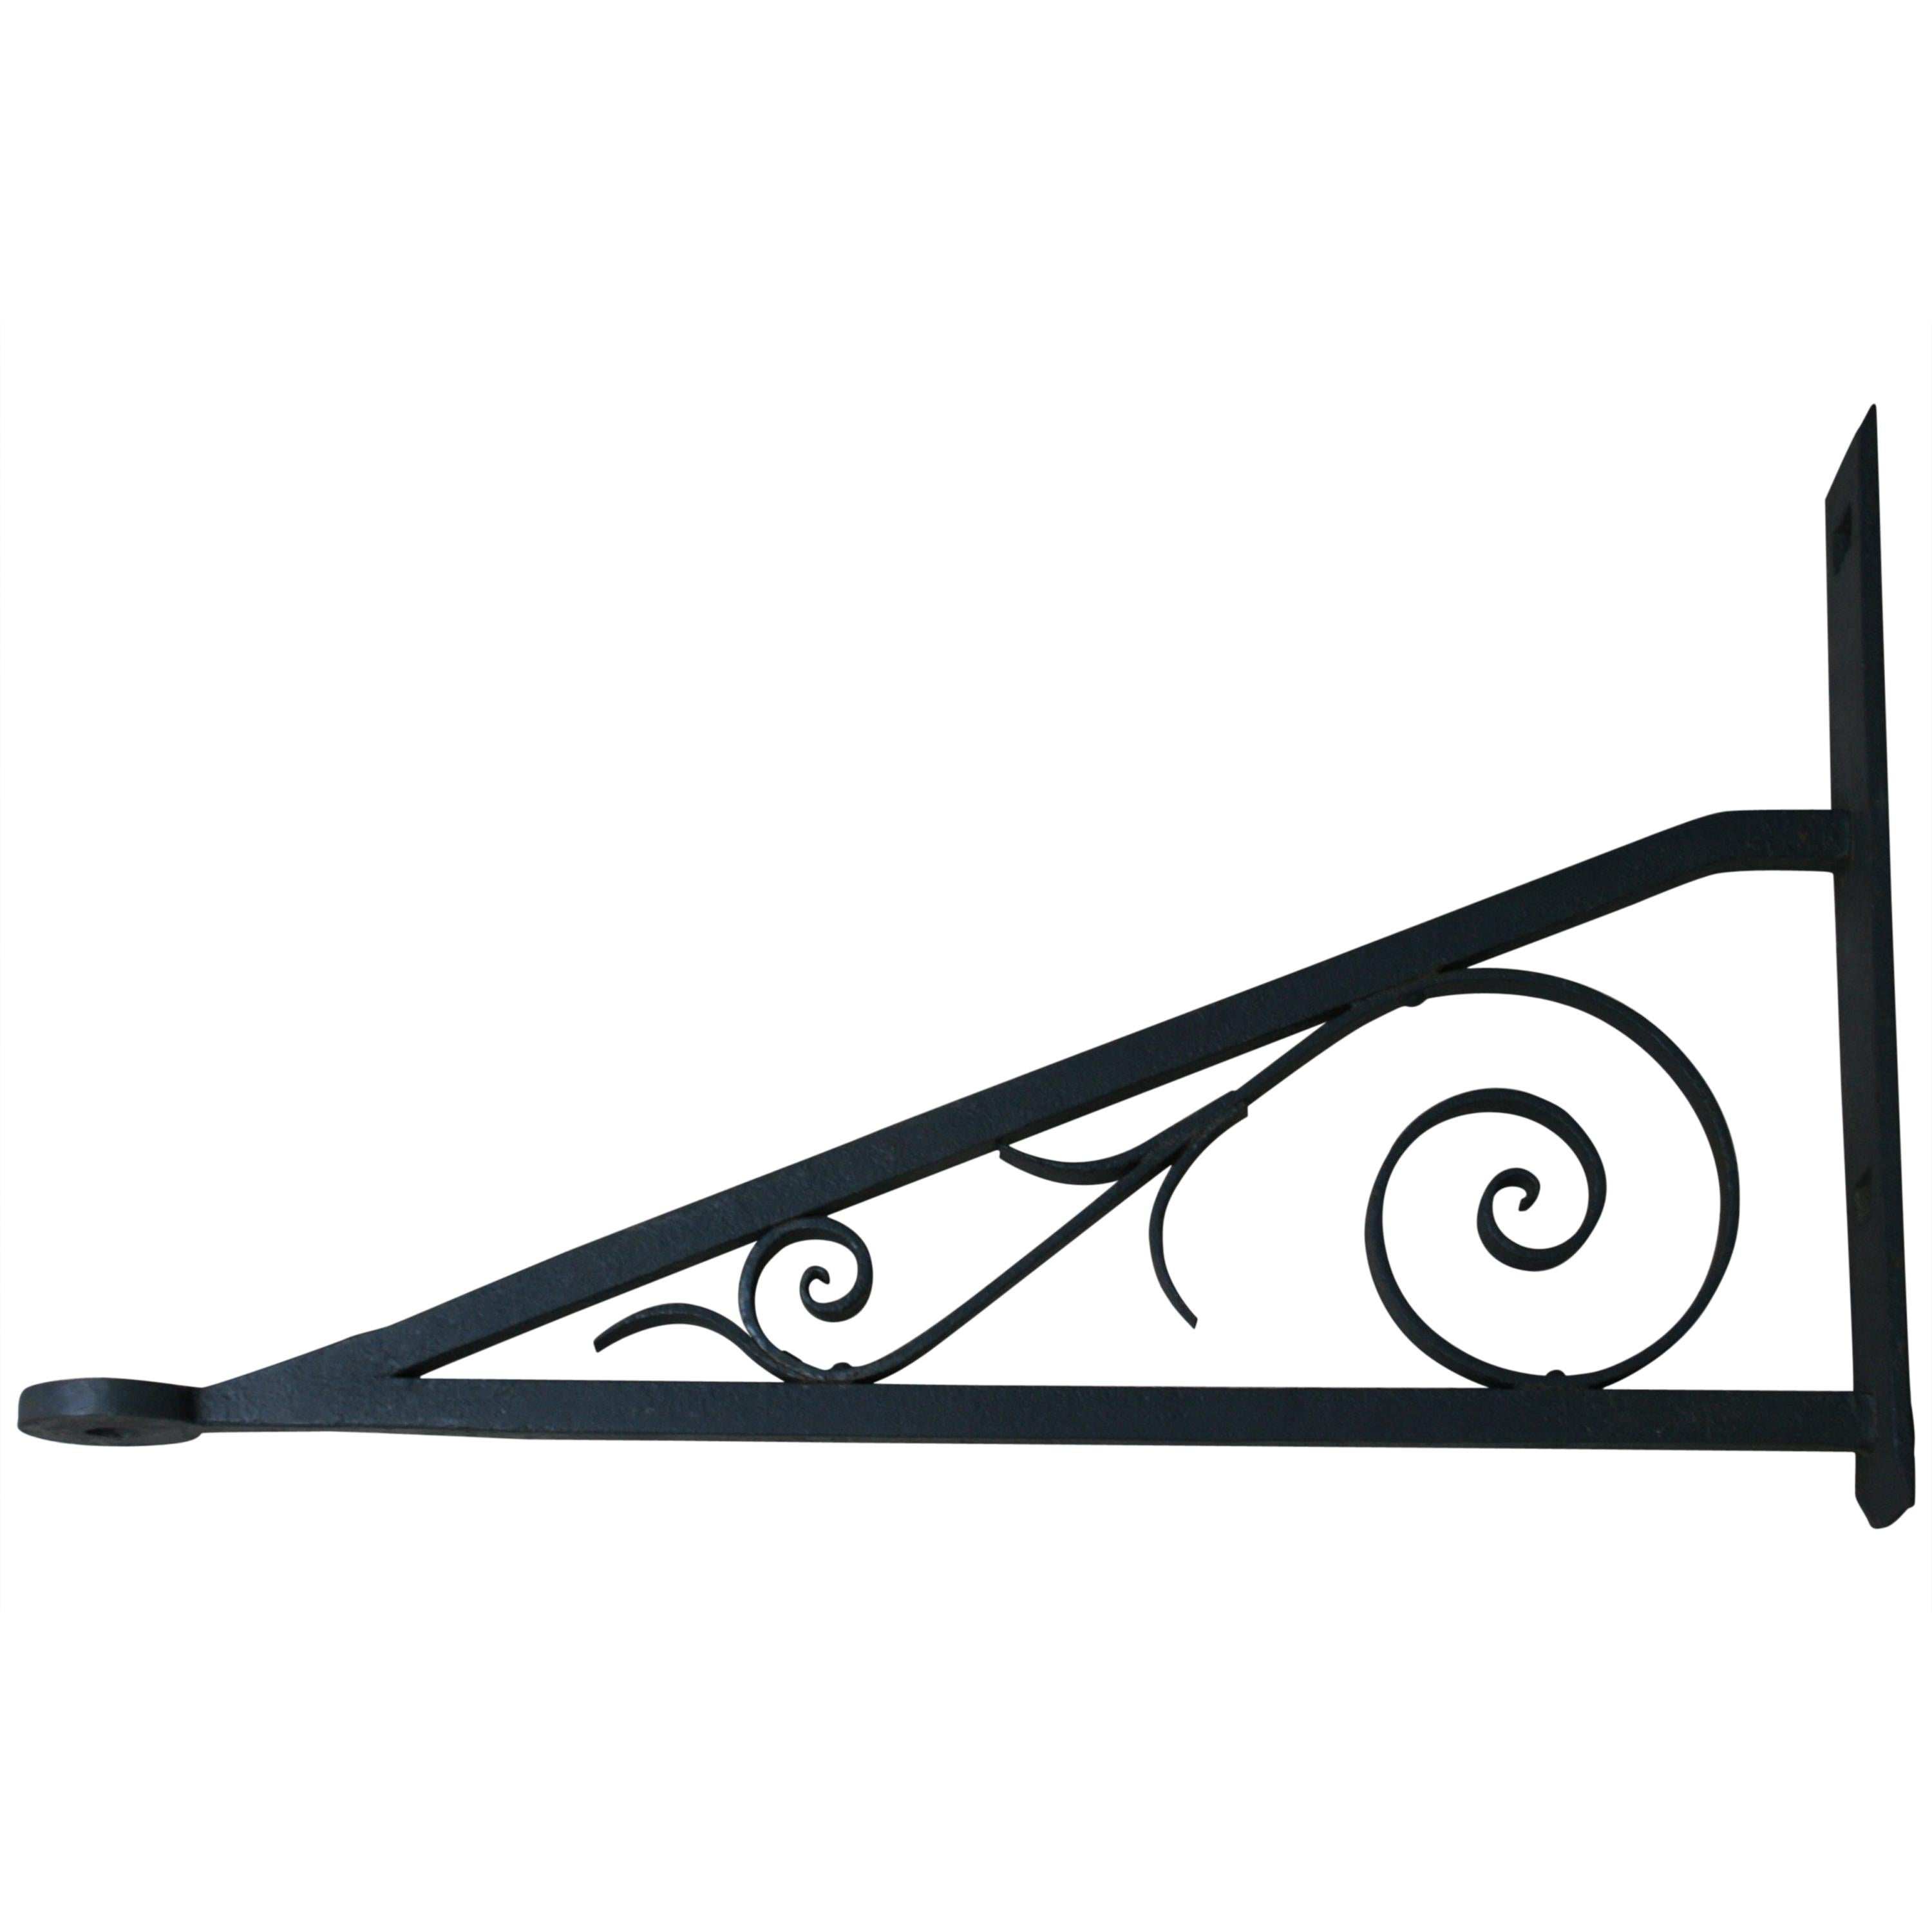 Antique Wrought Iron Shop Sign Bracket, Late 19th Century